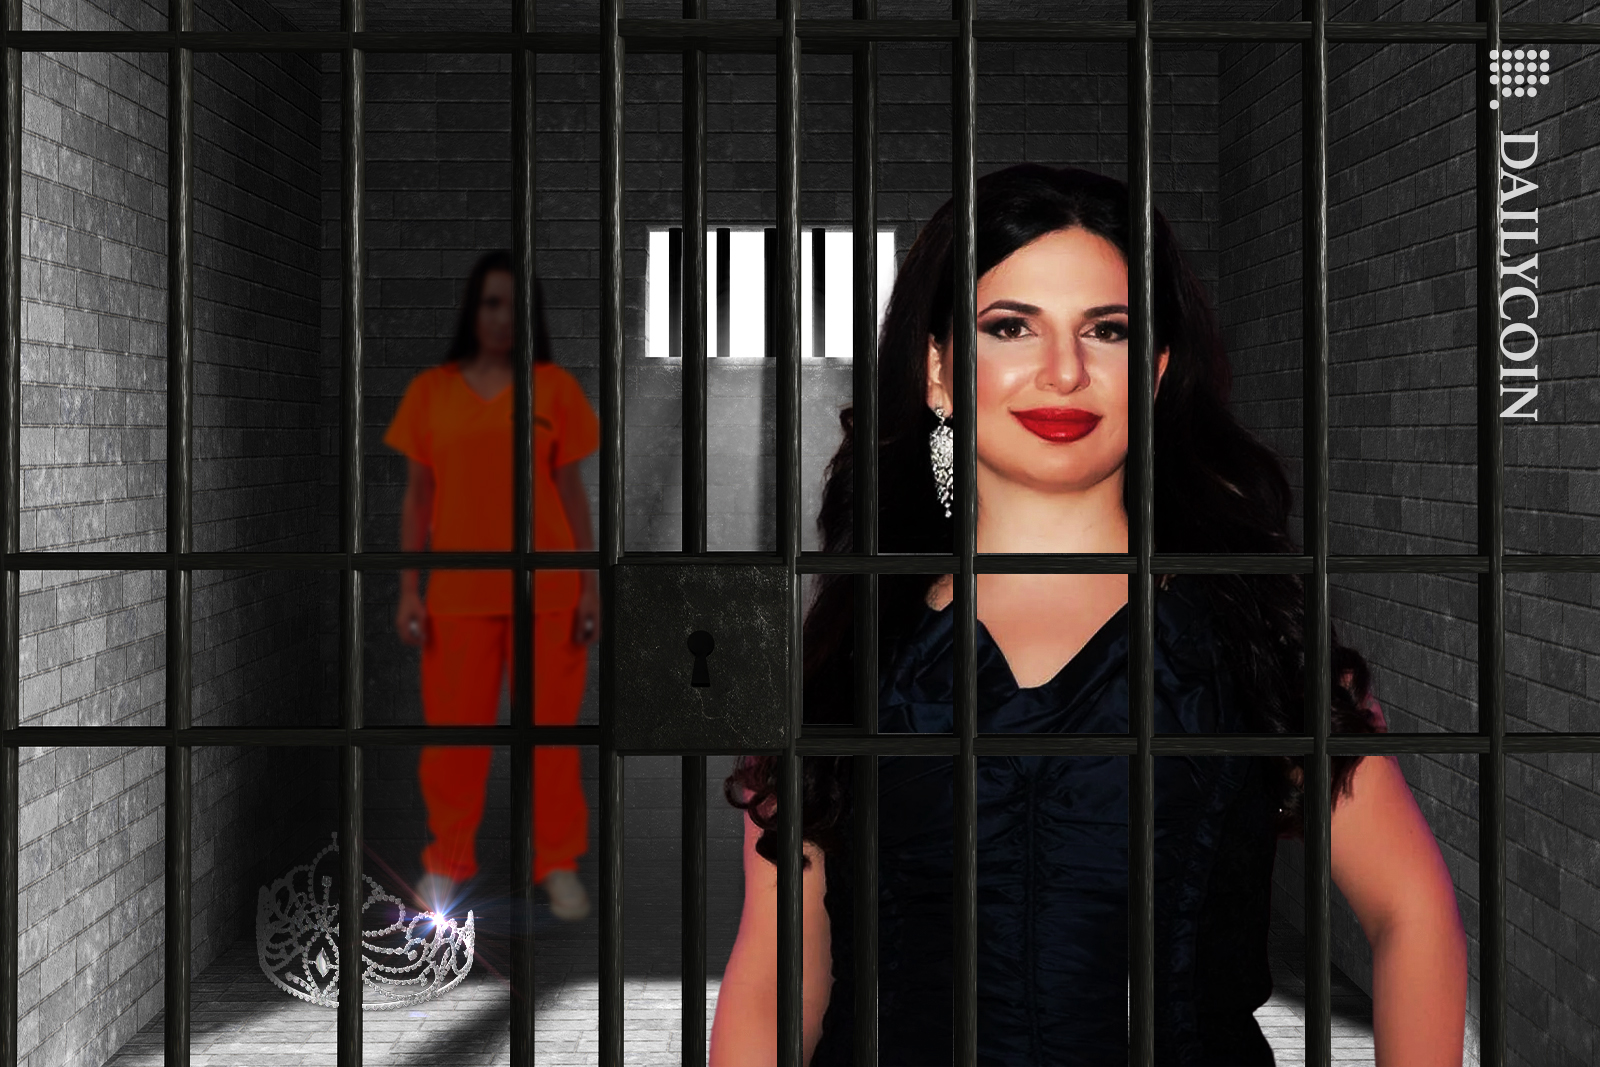 Cryptoqueen Ruja Ignatova has a new inmate in her cell.